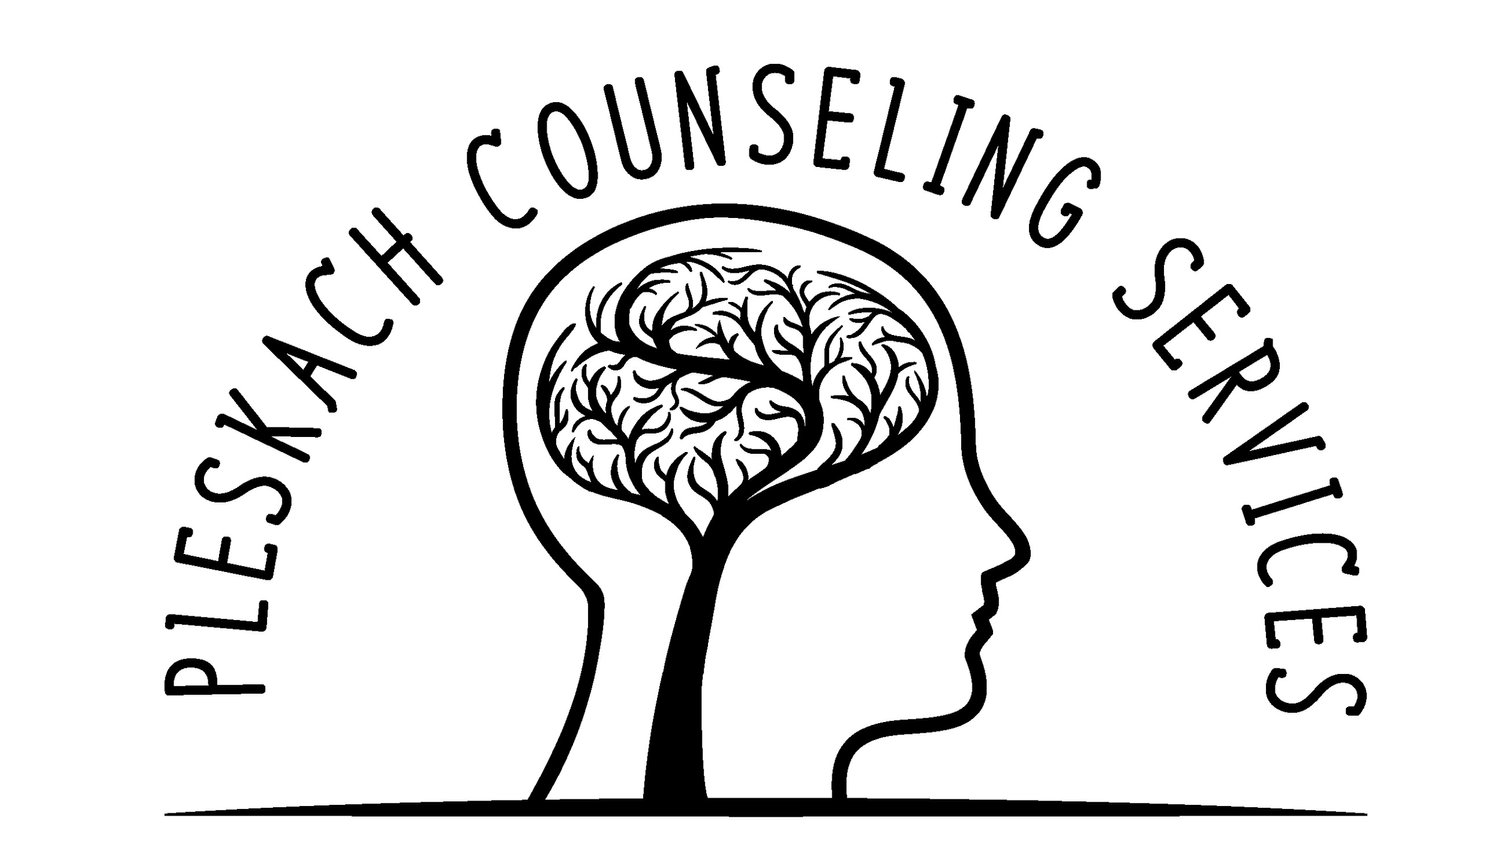 Pleskach Counseling Services